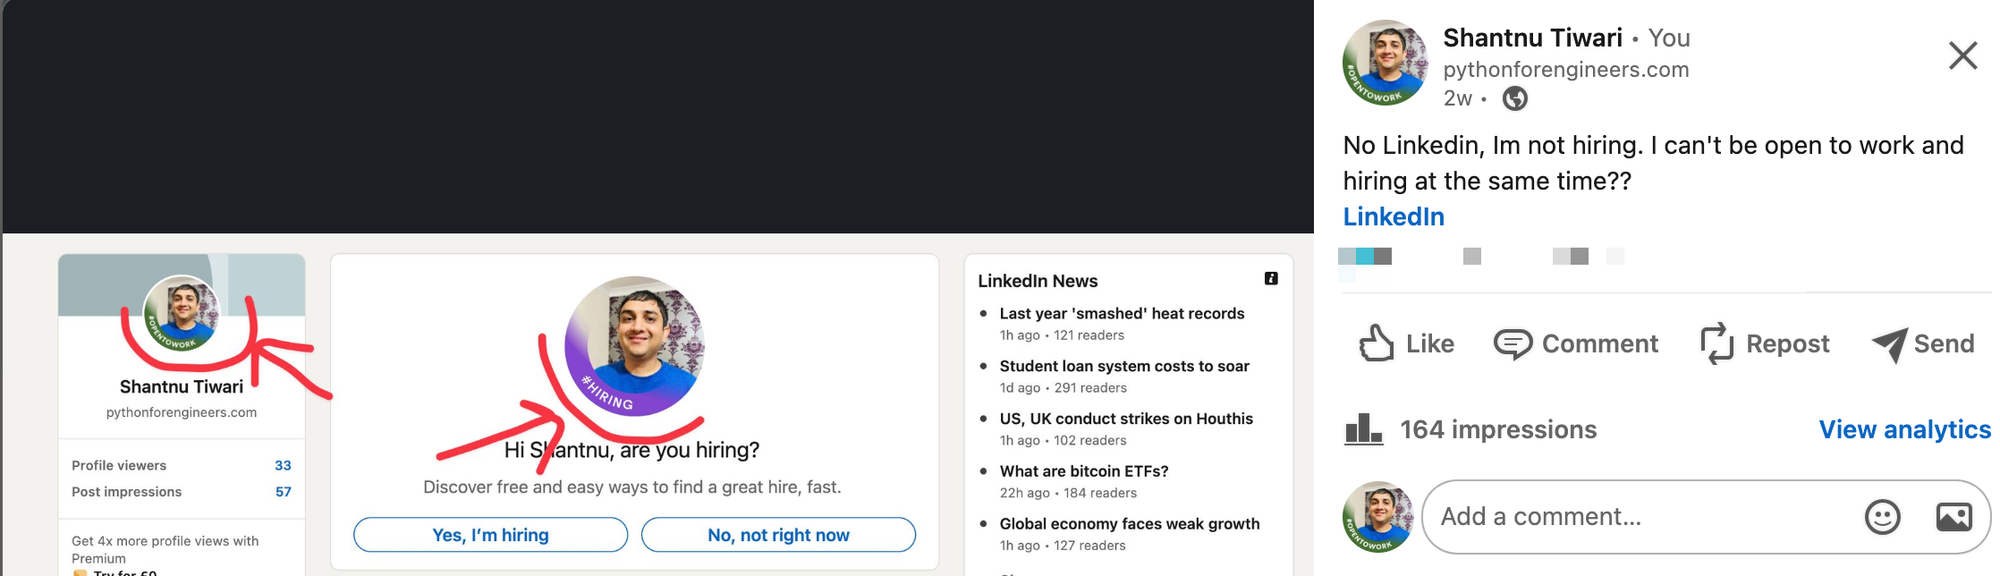 LinkedIn Has Become a Pile of Garbage (even more than usual)